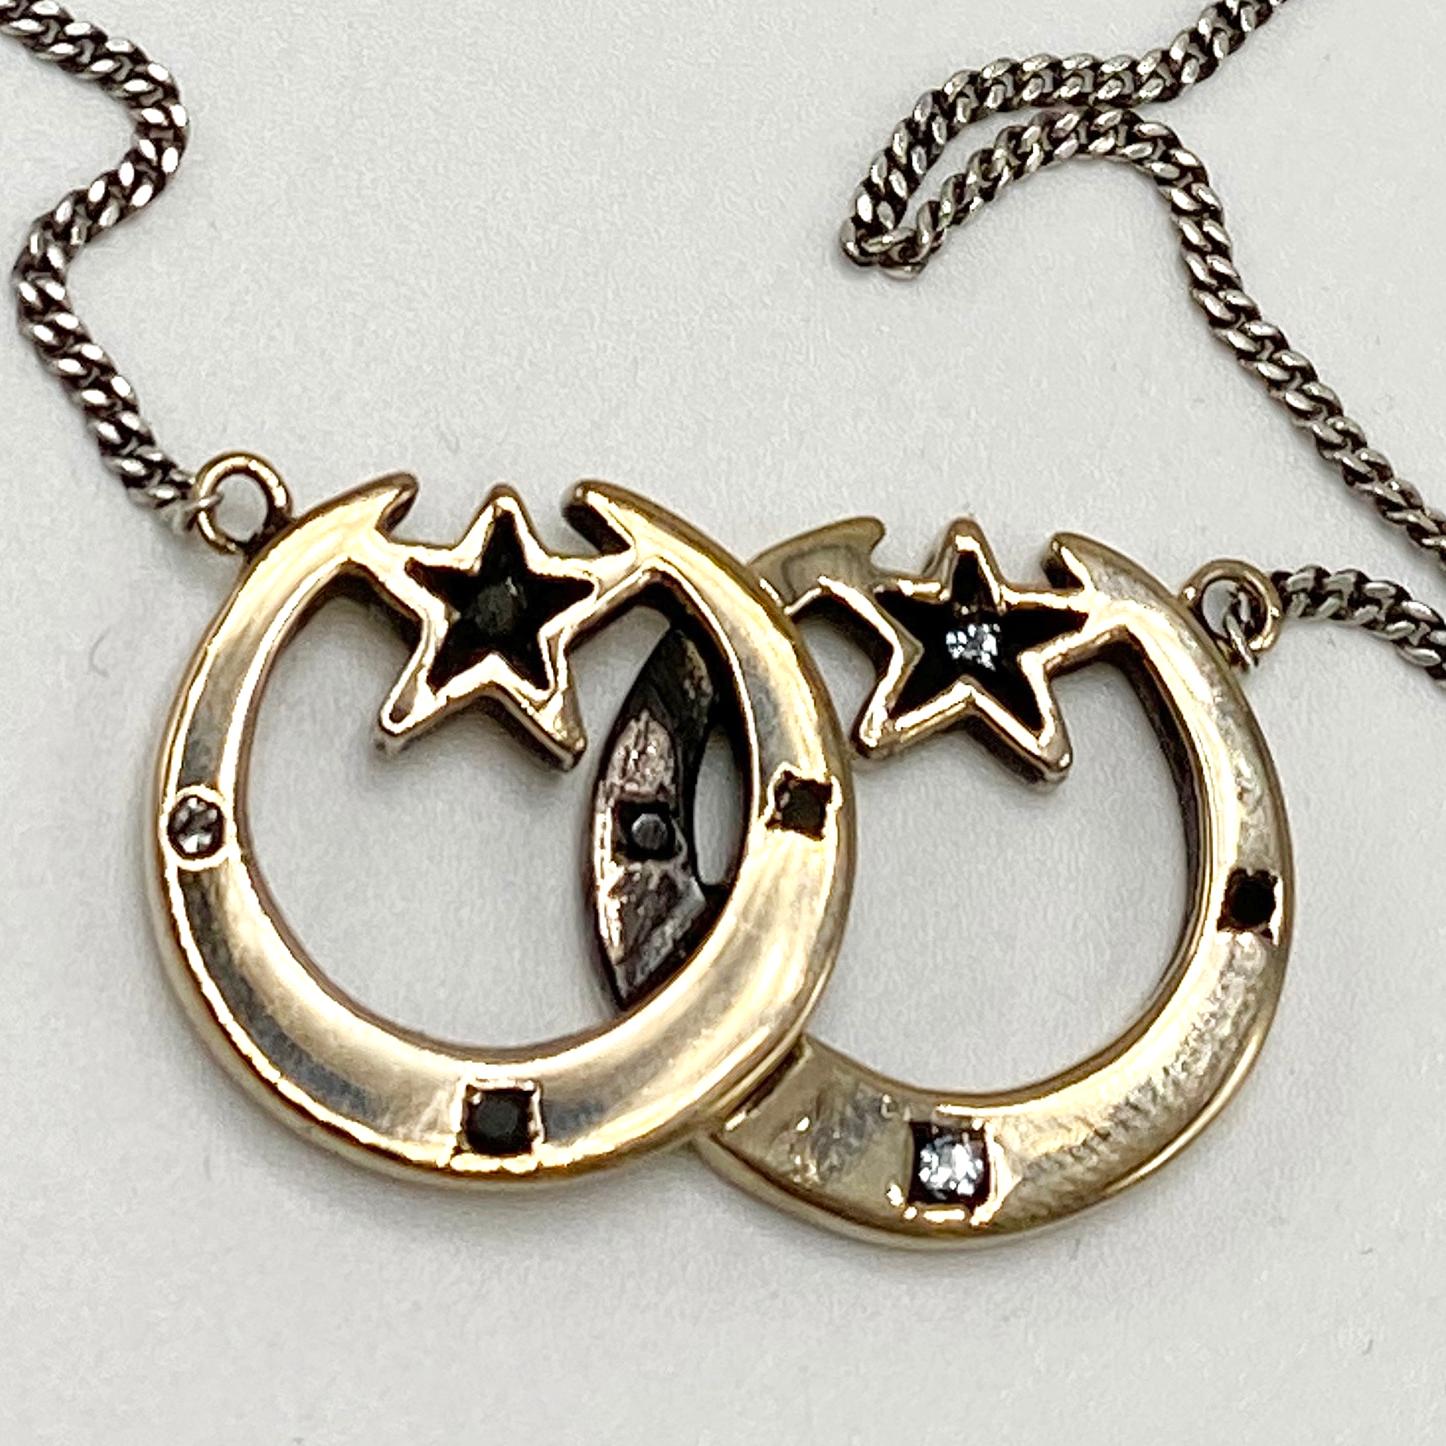 Contemporary White and Black Diamond Crescent Moon Star Necklace Gold J Dauphin For Sale